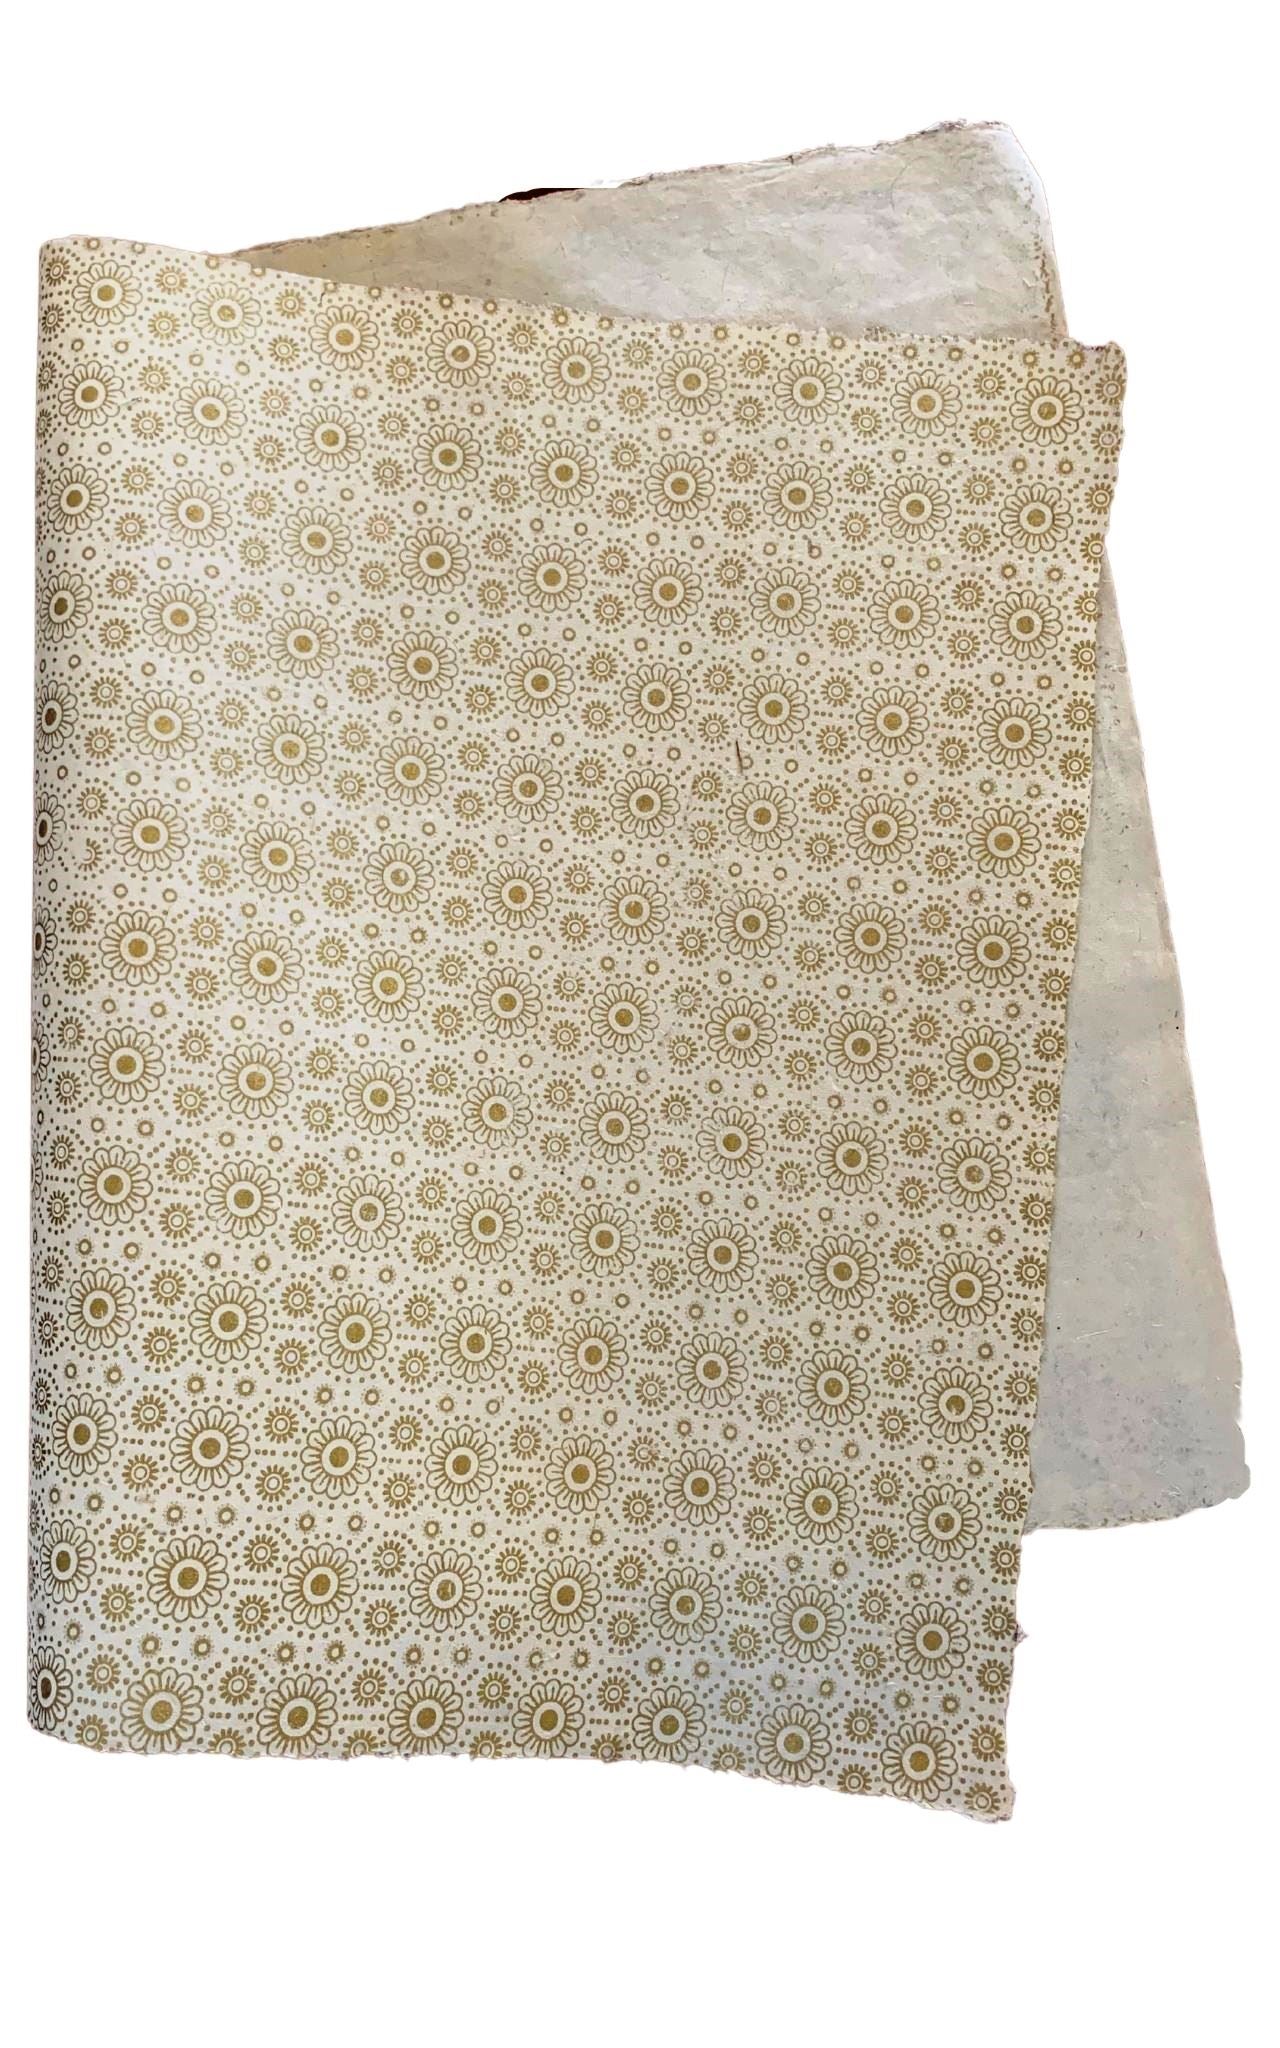 Surya Australia Sustainable Lokta paper Sheets from Nepal - Gold Flower